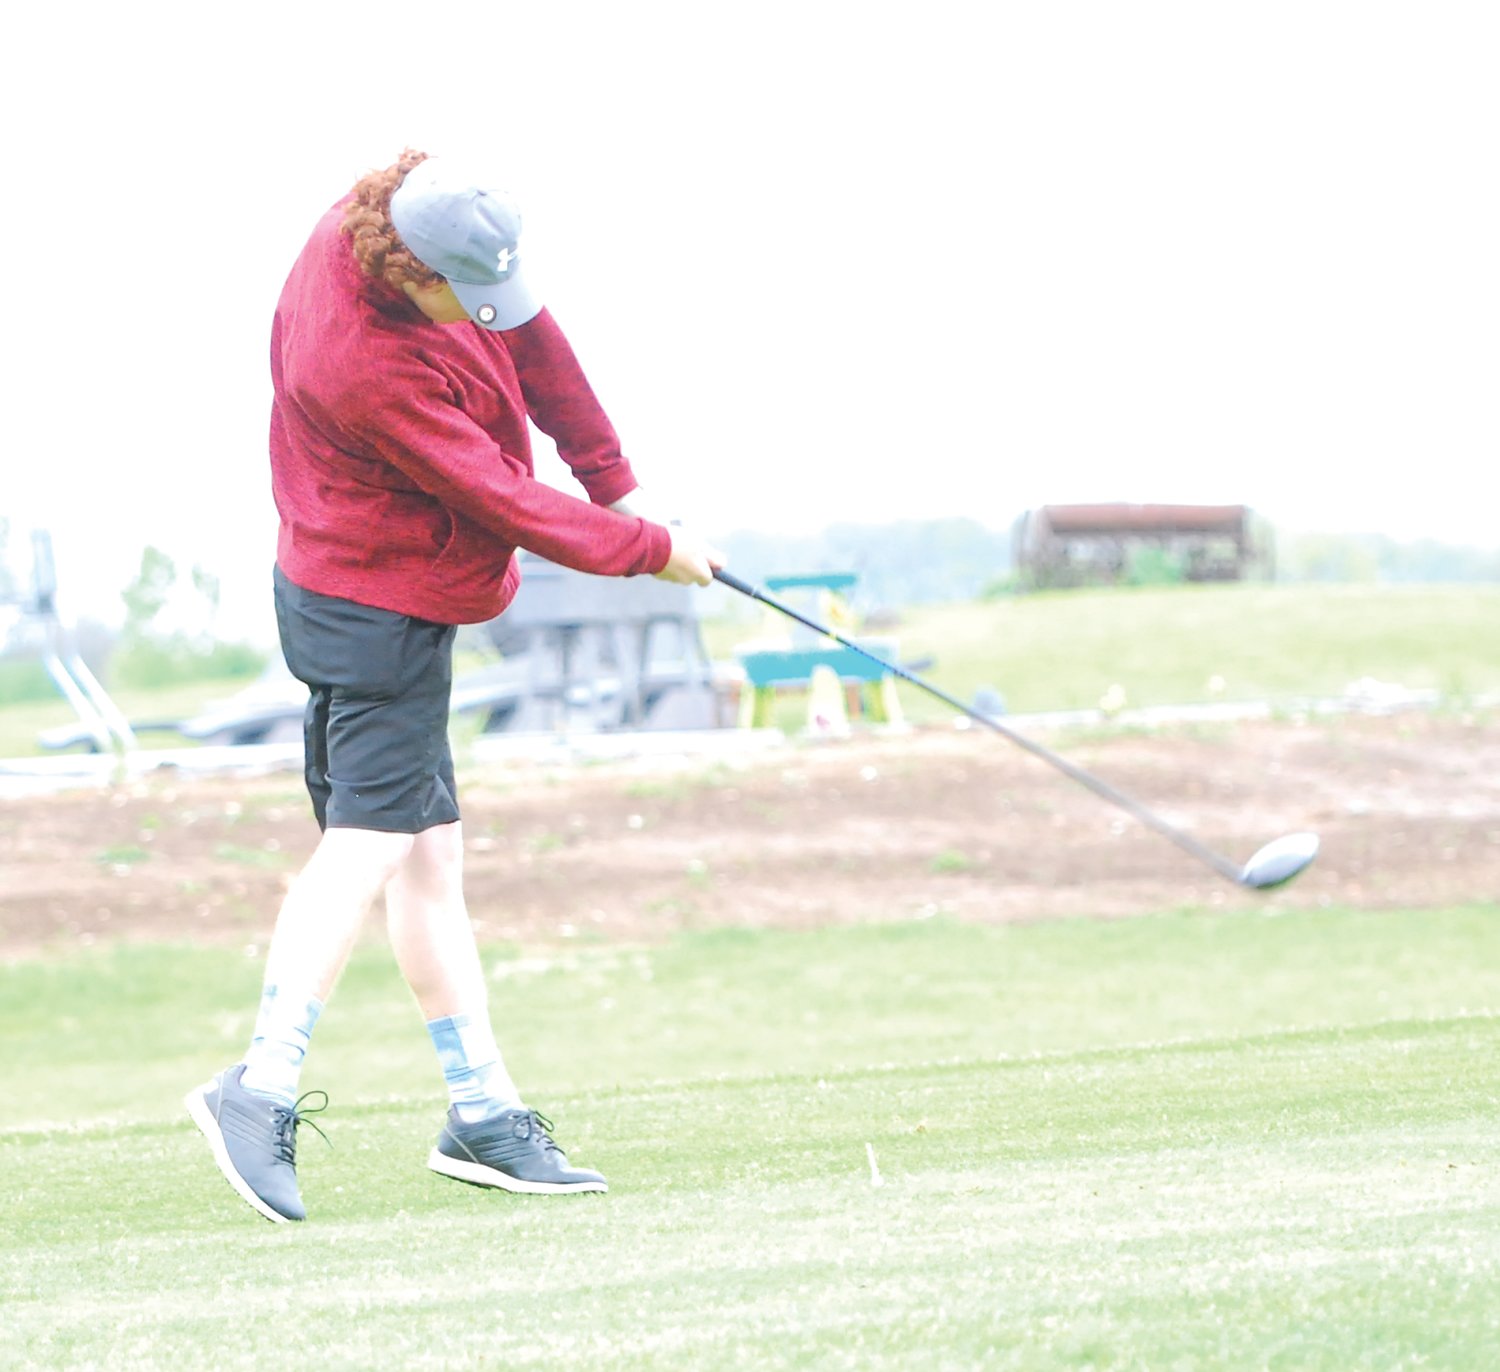 Southmont's Carson McKinney hits a tee shot on No. 14 at Rocky Ridge on Saturday.